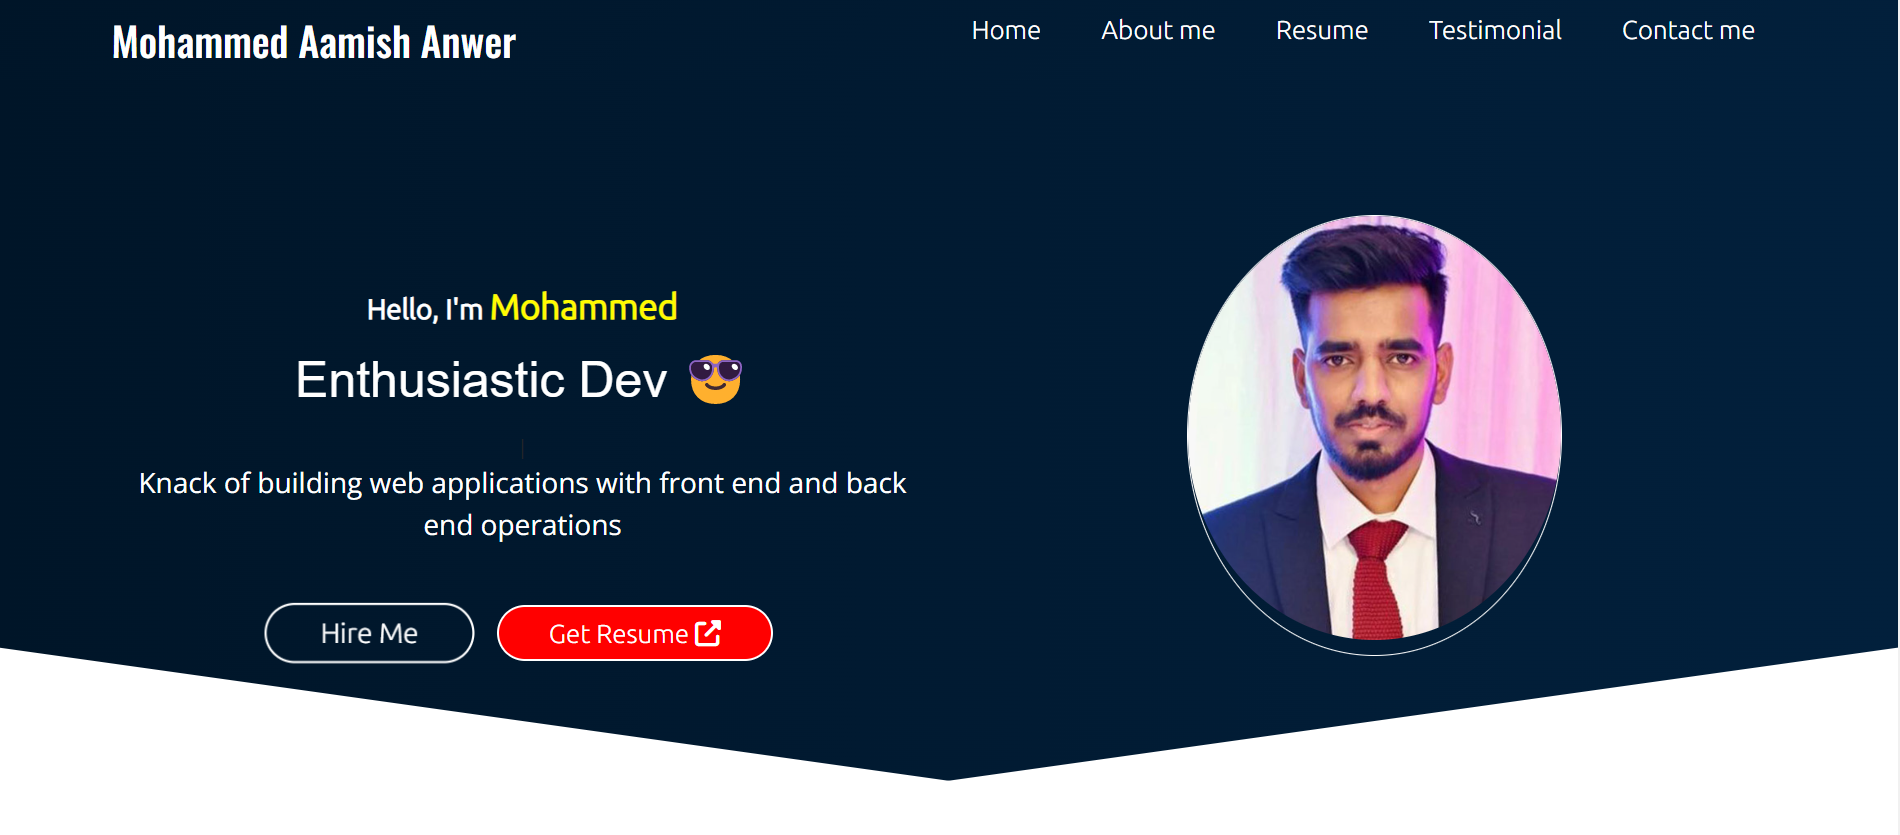 [YOY eS] [PSN] IY. Home About me Resume Testimonial Contact me

Hello, I'm Mohammed

Enthusiastic Dev &

Knack of building web applications with front end and back
(Sale Ne]oLIg= Tile 1a